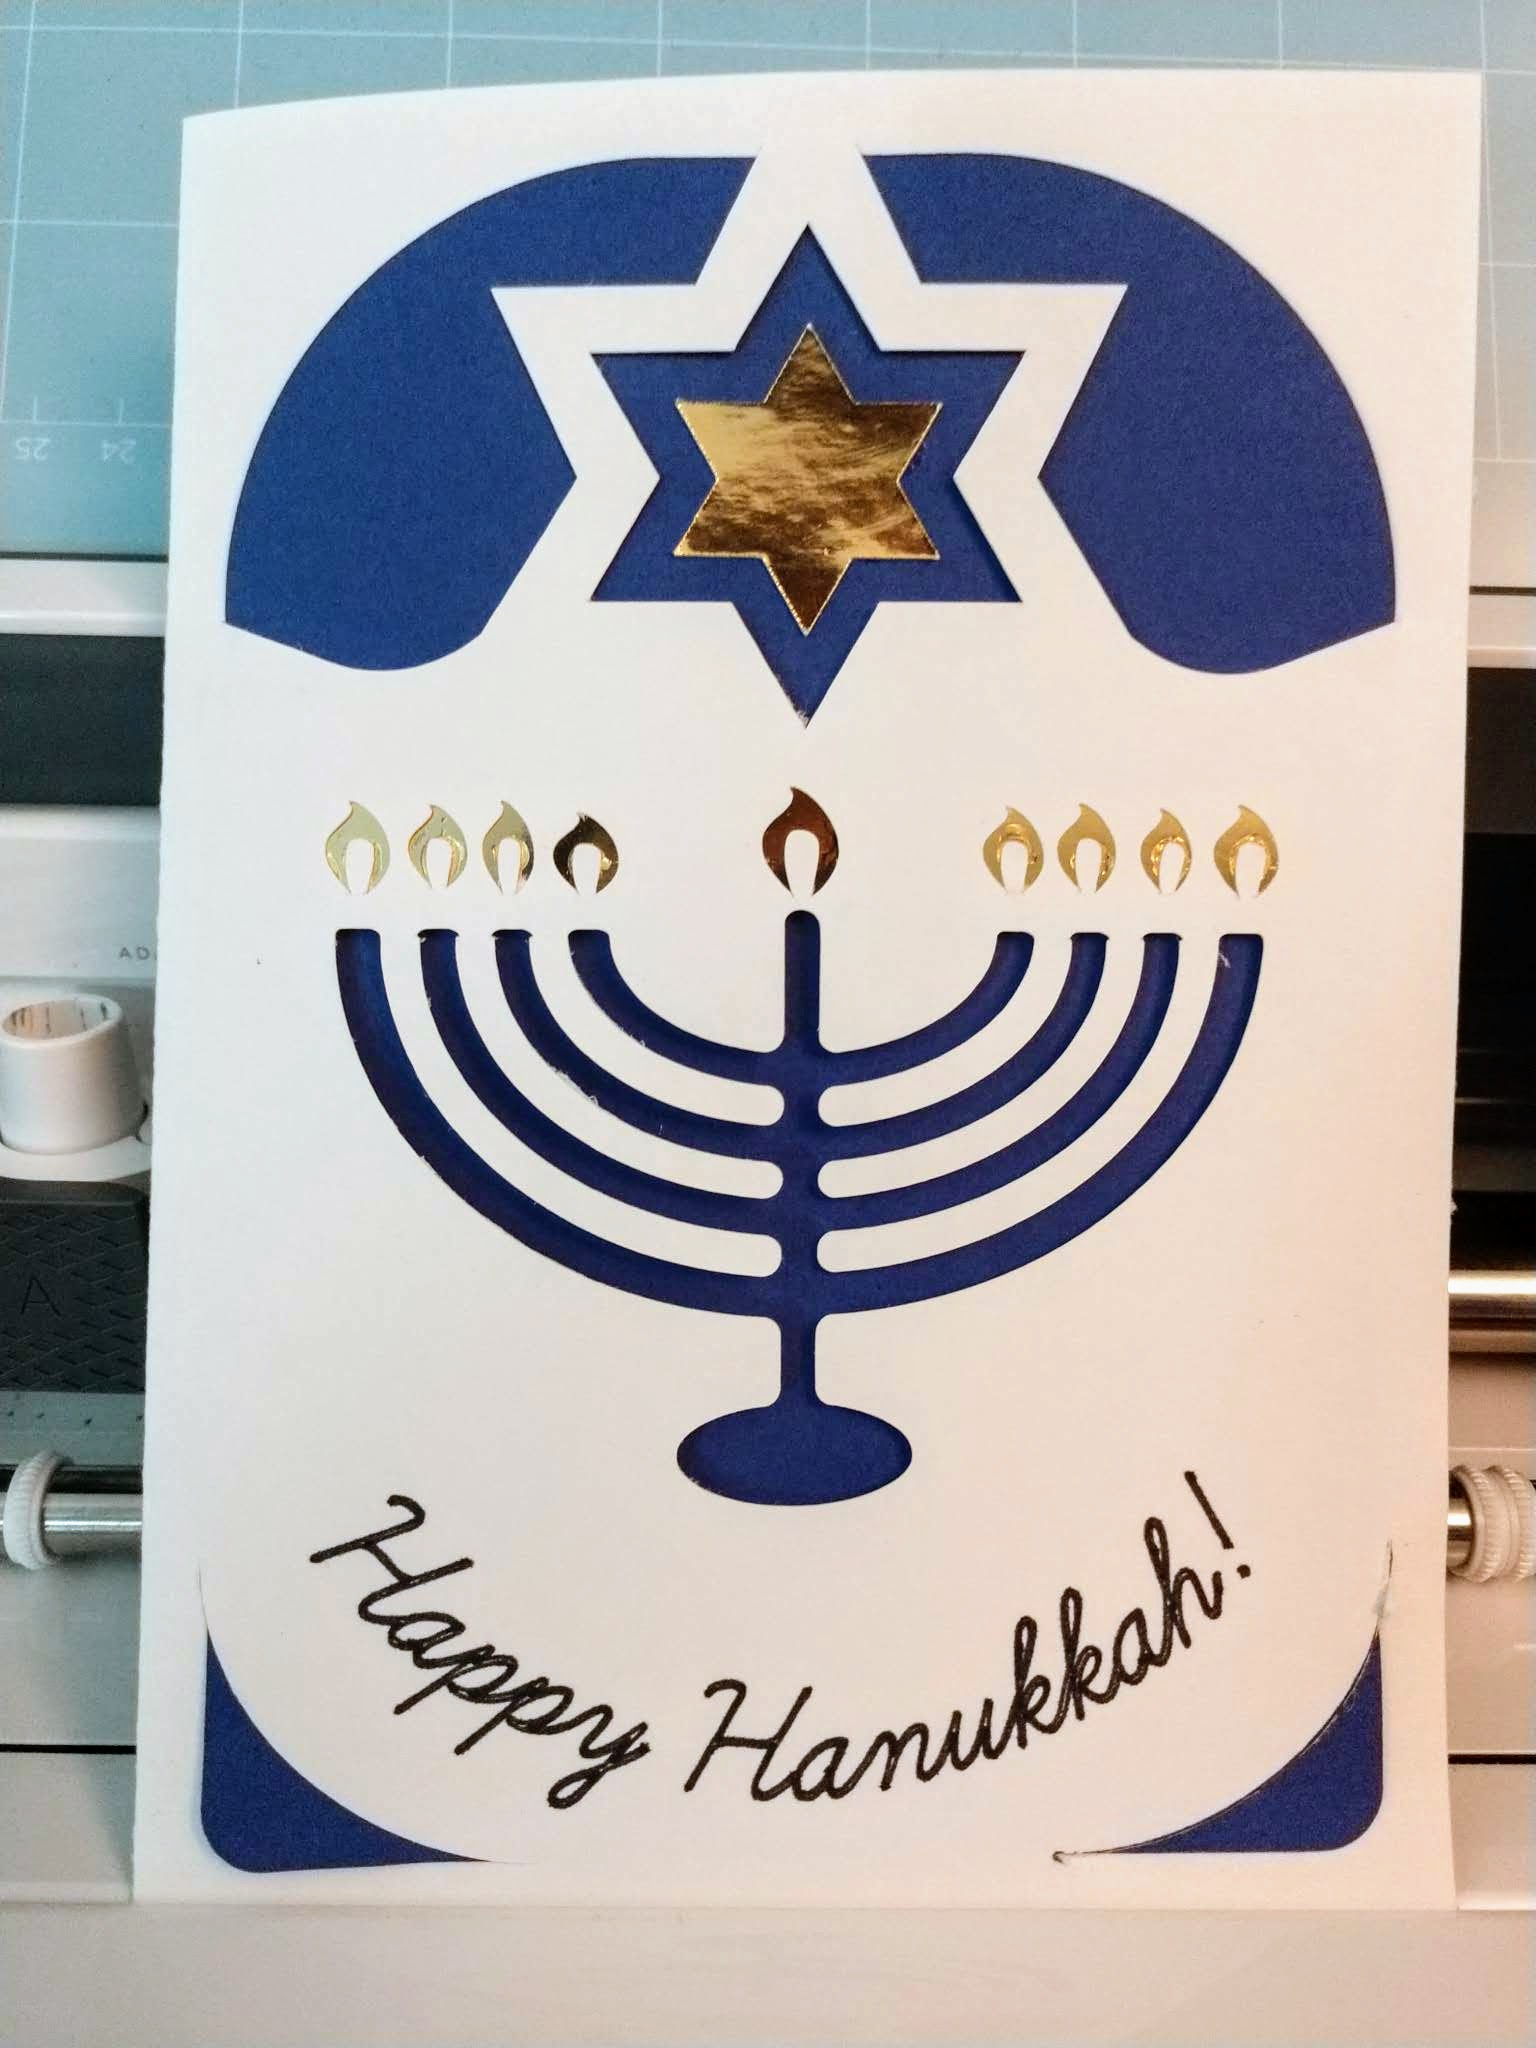 Stylized menorah with gold flames, and a gold and blue star of David above